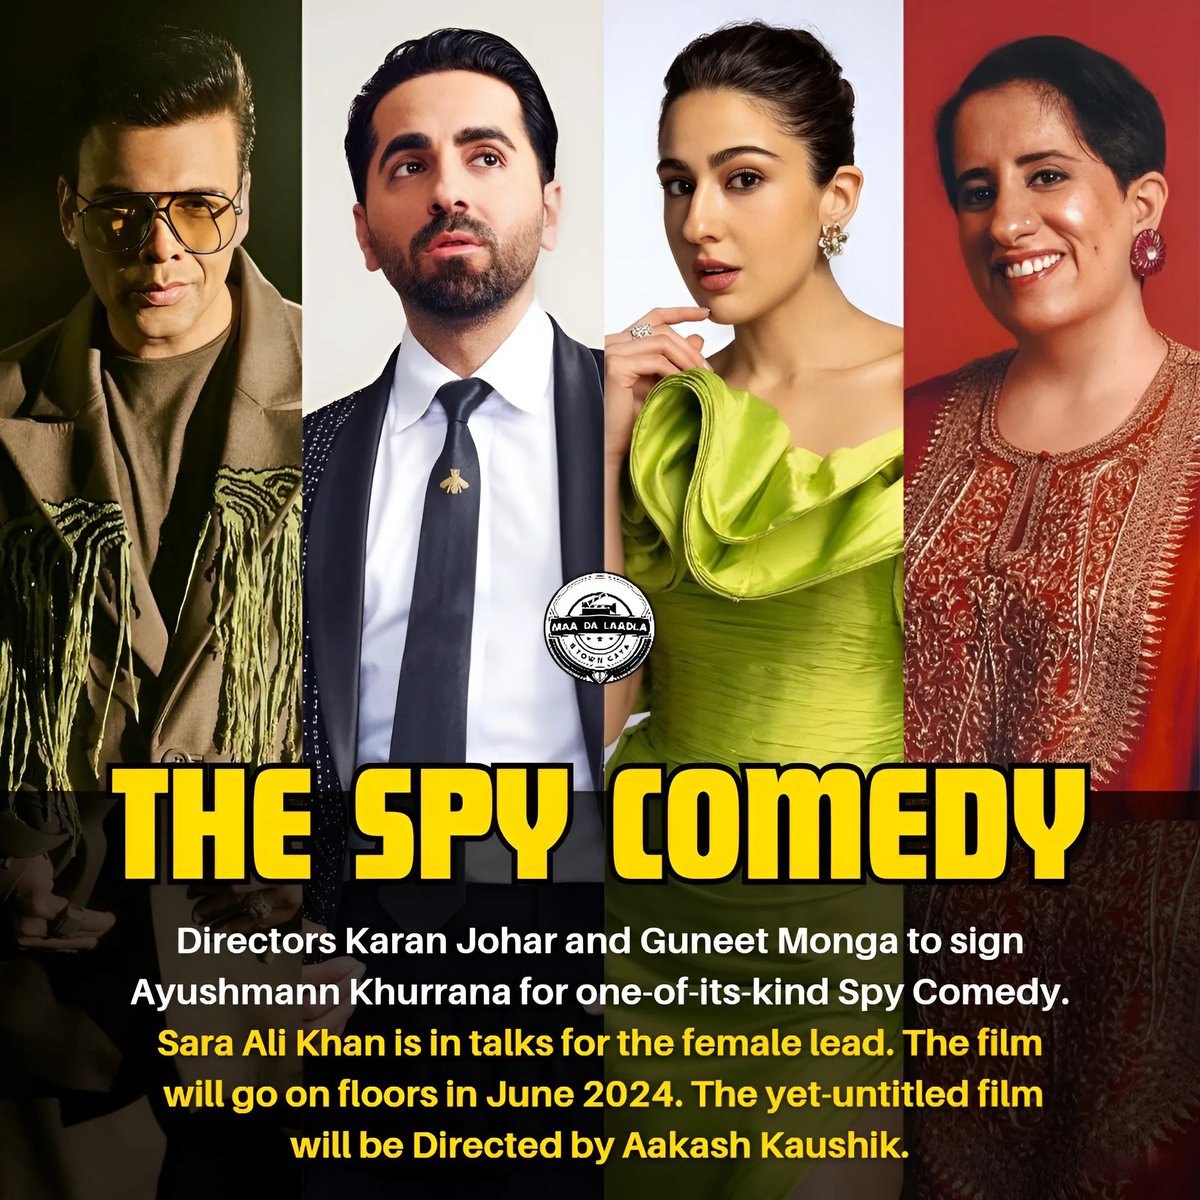 The yet-untitled film will be produced by #DharmaProductions and #SikhyaEntertainment. And will be directed by #AakashKaushik. 🕵🏻‍♂️🕵🏻‍♀️
It is touted to be a quintessential film as it breaks all the norms of the #Spyfilms made in #HindiCinema to date. 🔥🔥🔥

#KaranJohar #GuneetMonga